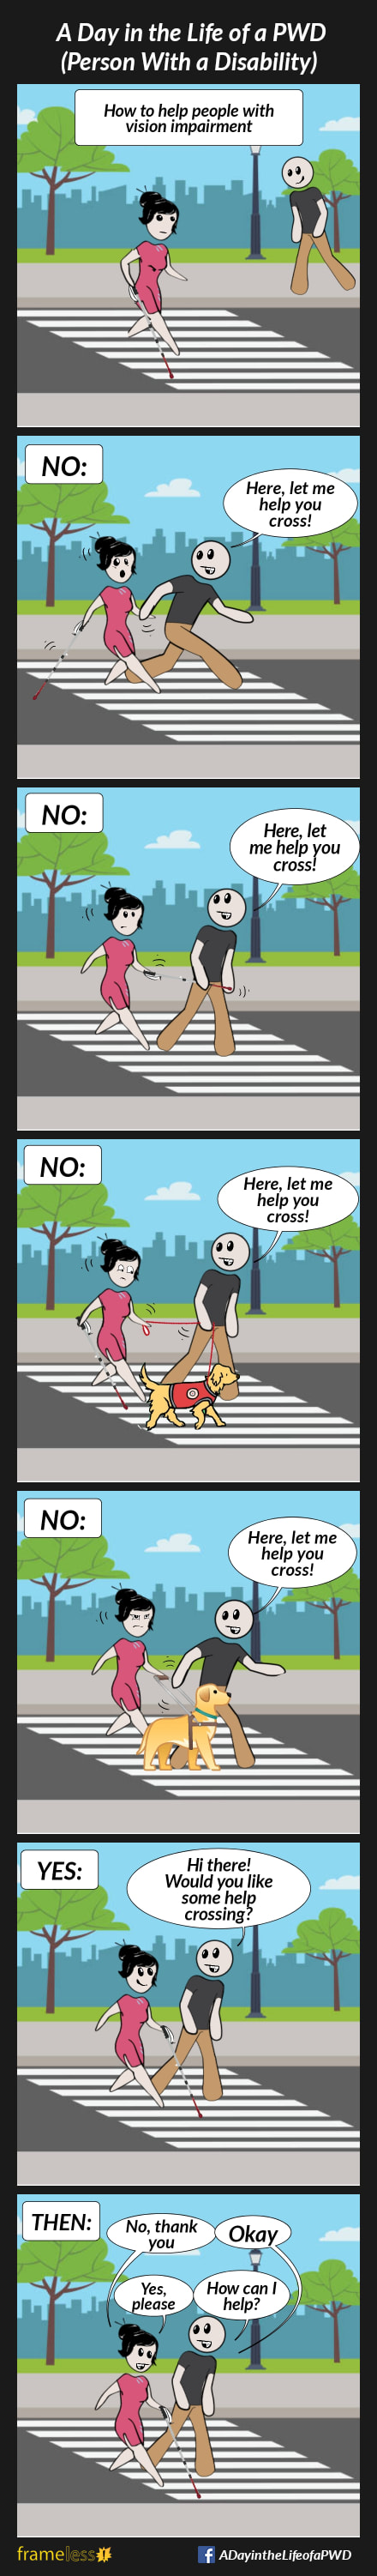 COMIC STRIP 
A Day in the Life of a PWD (Person With a Disability) 

Frame 1:
CAPTION: How to help people with vision impairment 
A woman using a white cane is crossing the road in a crosswalk. A man nearby notices her.

Frame 2:
CAPTION: NO:
MAN (grabbing the woman's hand, startling her): Here, let me help you cross!

Frame 3:
CAPTION: NO:
MAN (grabbing the woman's cane): Here, let me help you cross!

Frame 4:
CAPTION: NO:
The woman is walking with a service dog on a leash.
MAN (grabbing the leash): Here, let me help you cross!

Frame 5:
The woman is walking, holding a guide dog's harness bar.
CAPTION: NO:
MAN (grabbing the harness bar): Here, let me help you cross!

Frame 6:
CAPTION: YES:
MAN (politely walking beside her): Hi there! Would you like some help crossing?

Frame 7:
CAPTION: THEN:
WOMAN: No, thank you
MAN: Okay
.....or.....
WOMAN: Yes, please
MAN: How can I help?